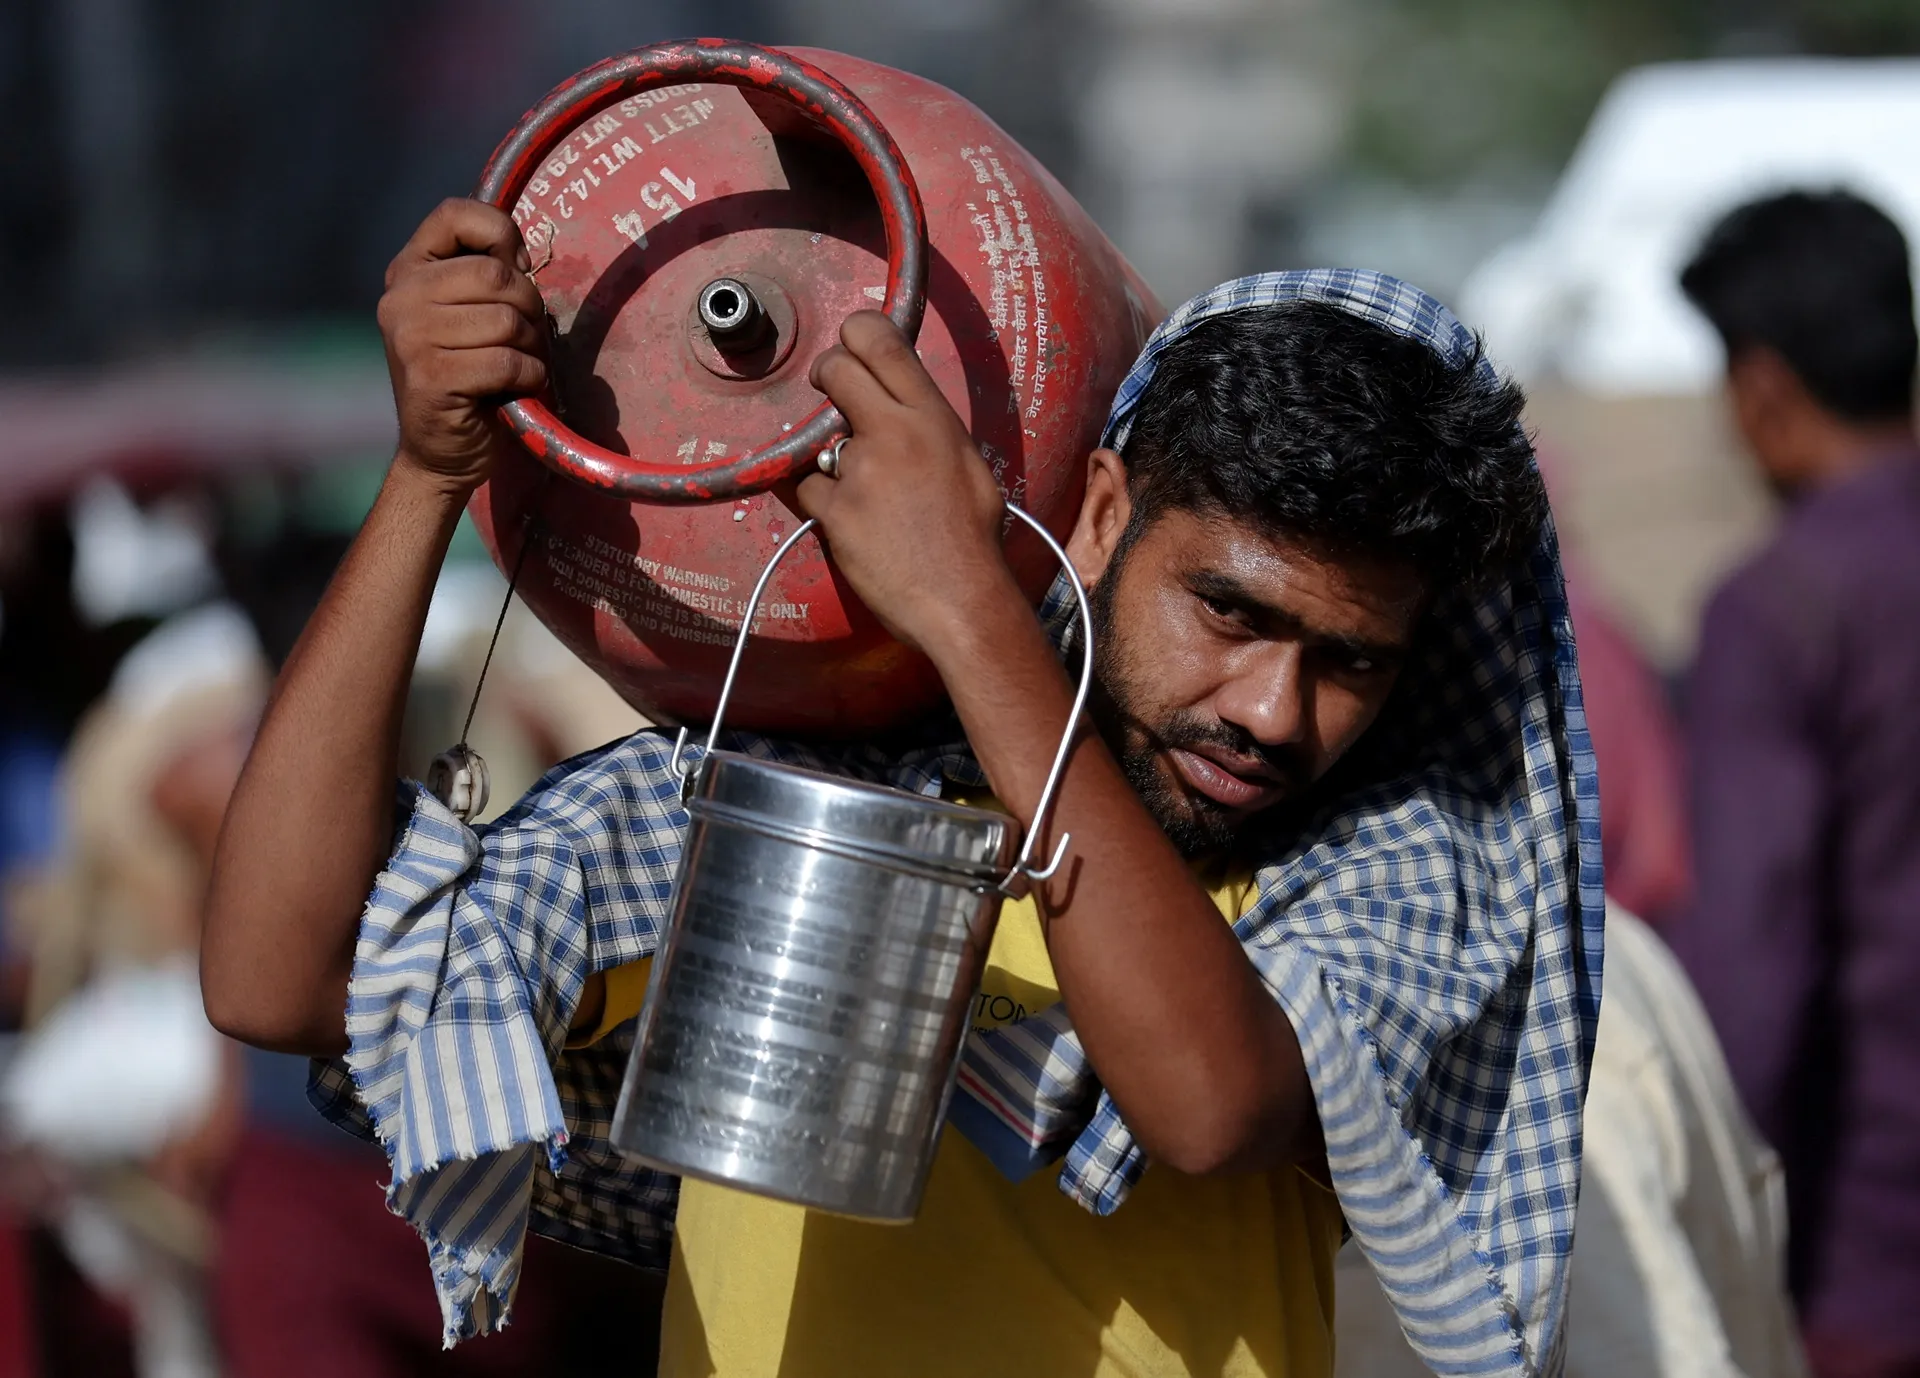 A man carries an LPG cylinder on his shoulder at a wholesale market in the old quarters of Delhi, India, June 7, 2023. REUTERS/Anushree Fadnavis